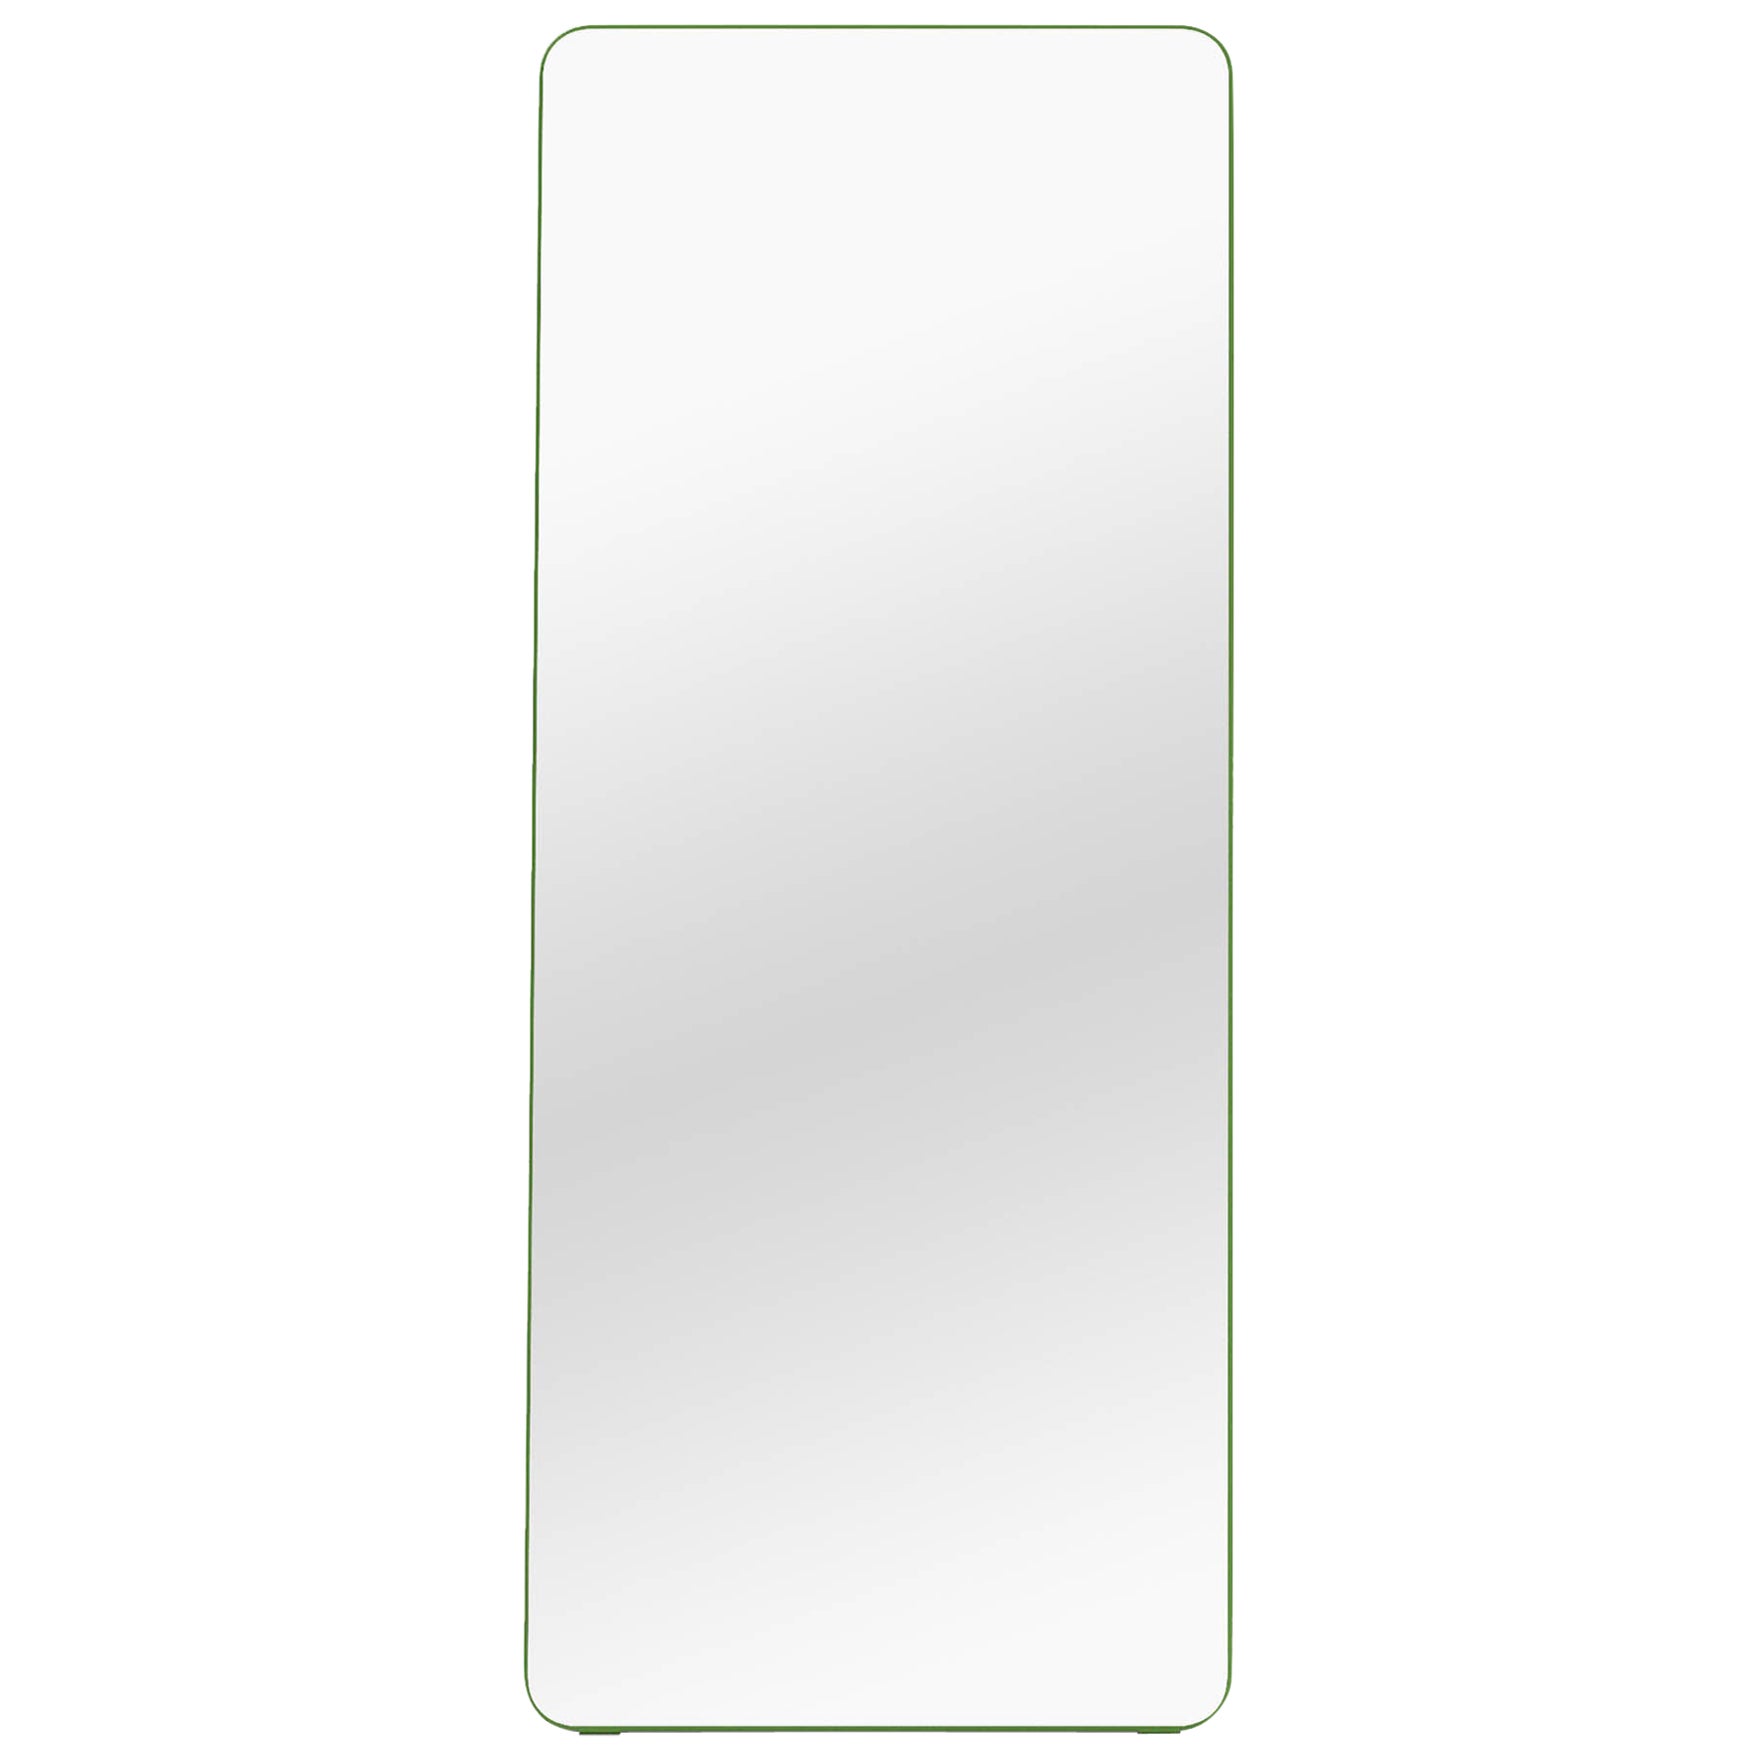 Contemporary Mirror 'Loveself 05' by Oitoproducts, Green Frame